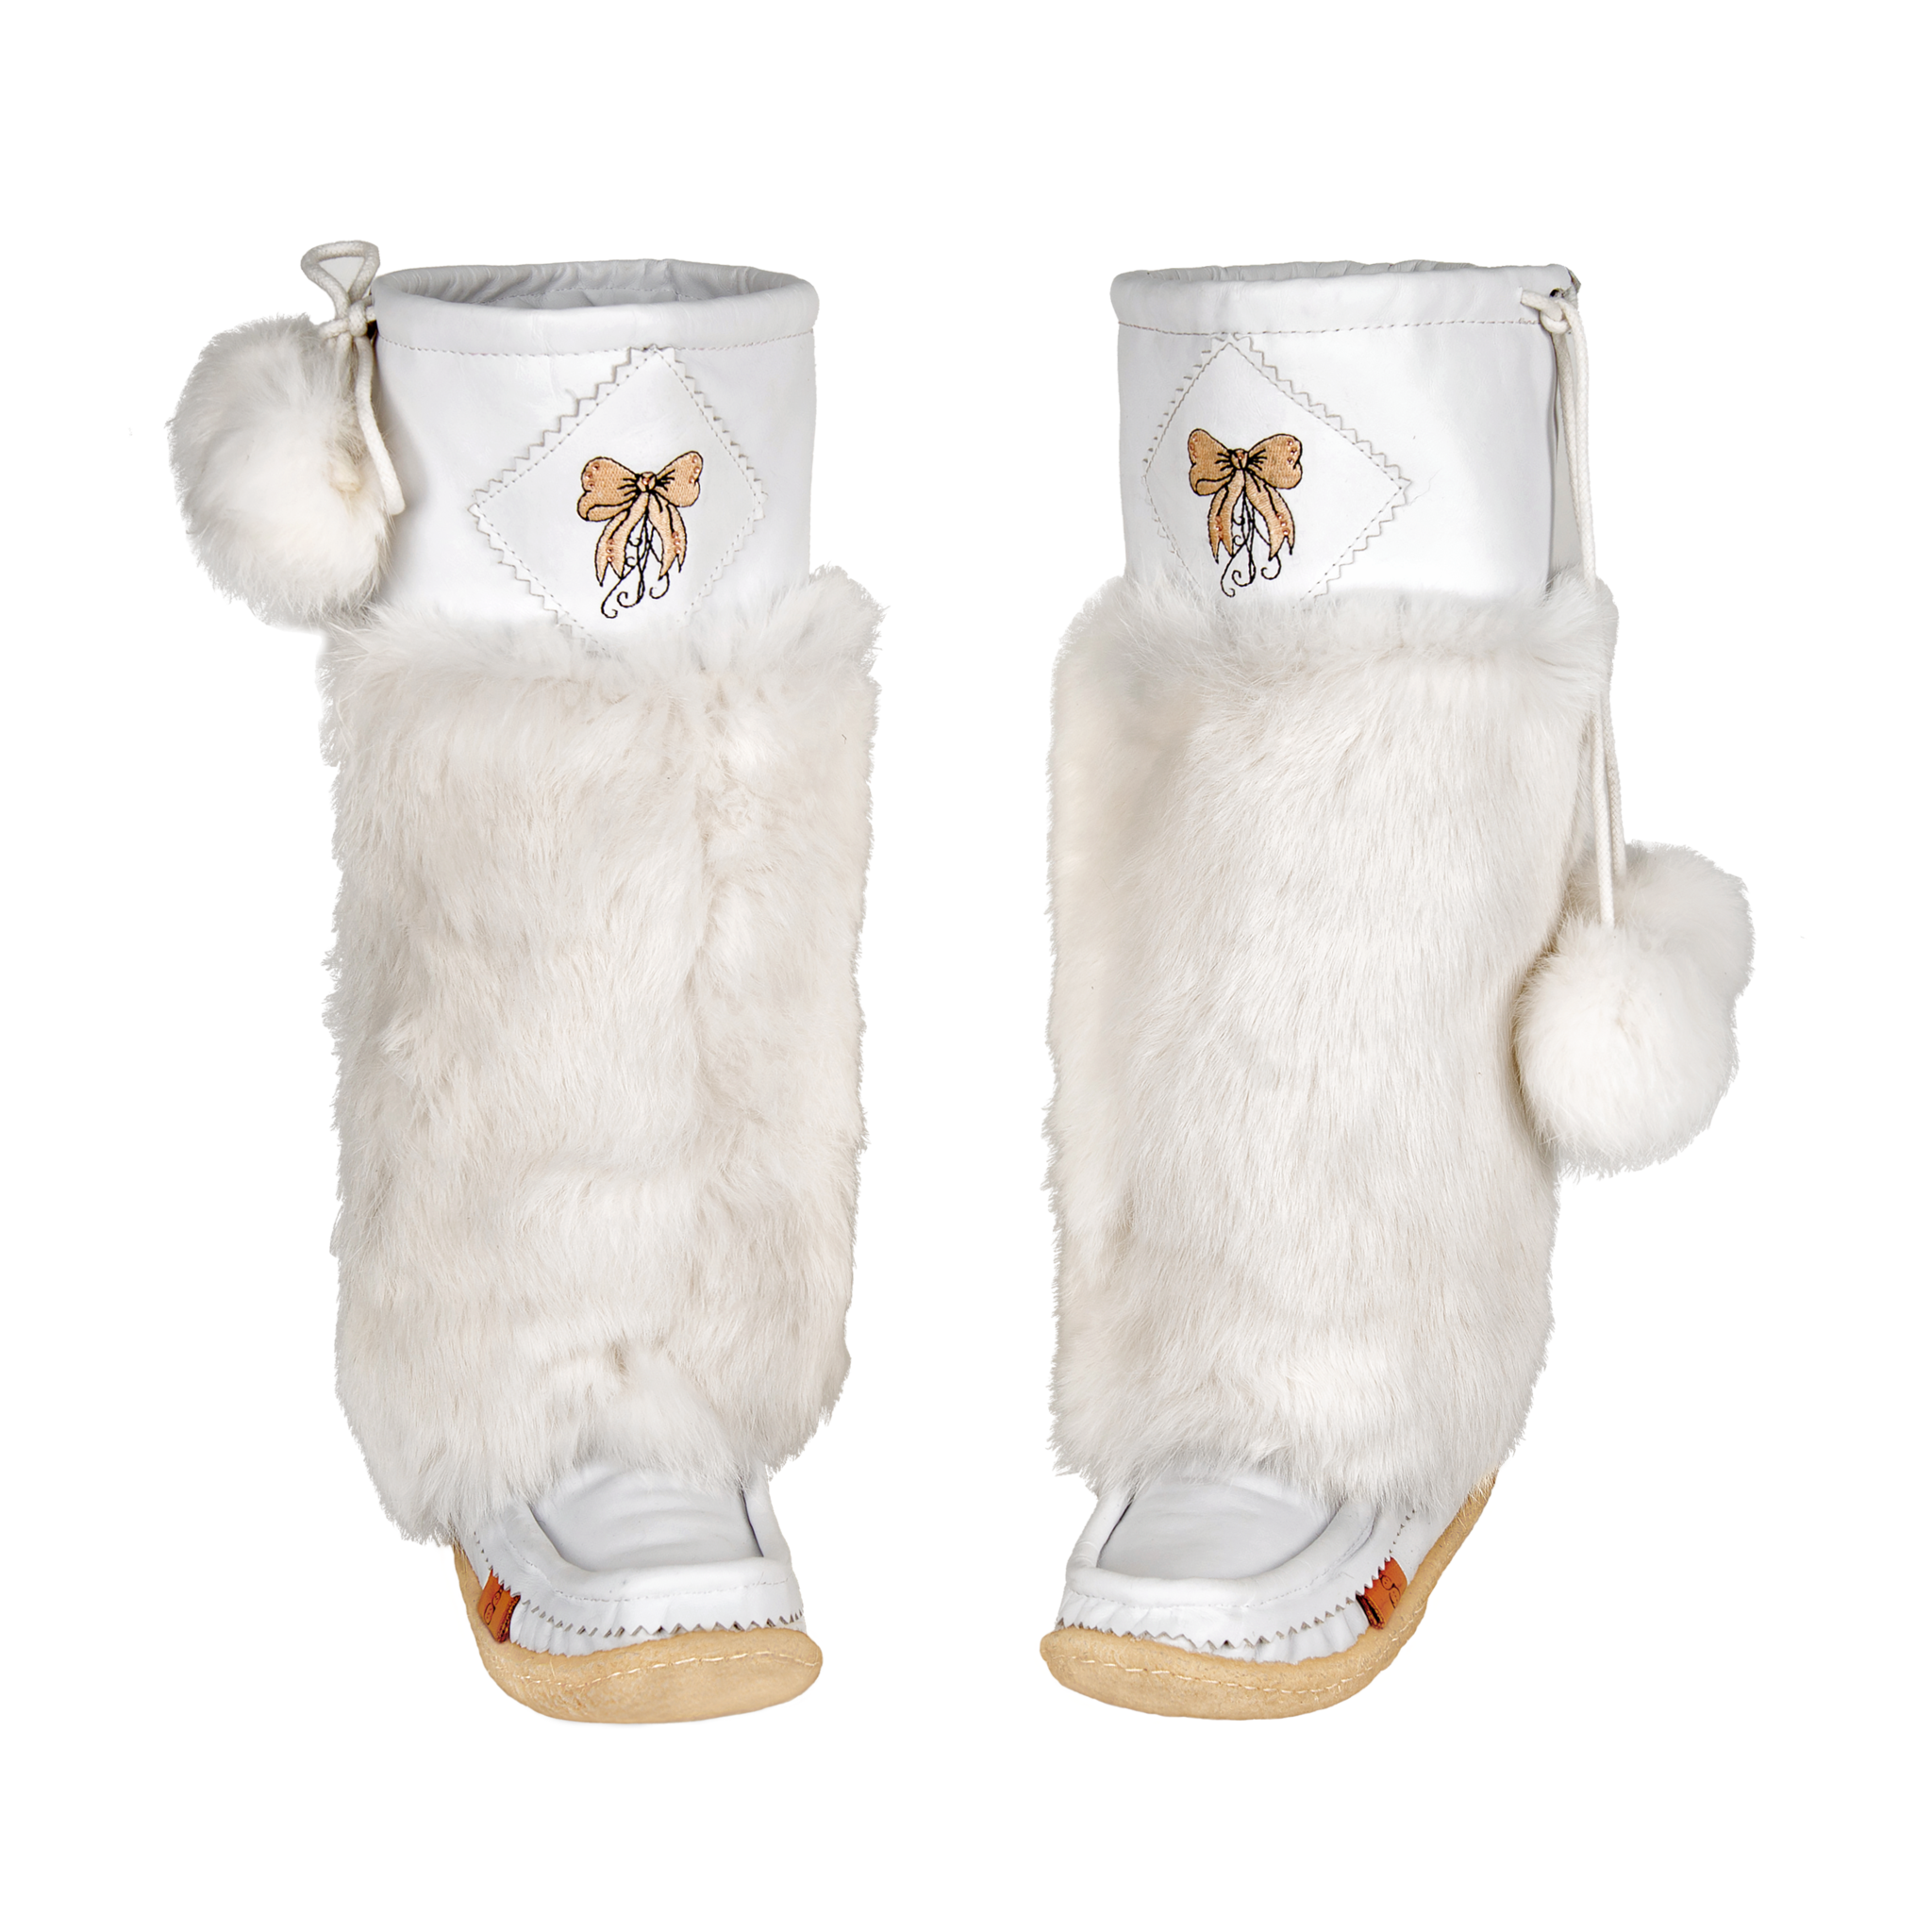 Authentic White Leather Mukluks Boots Lukluks By Bayly